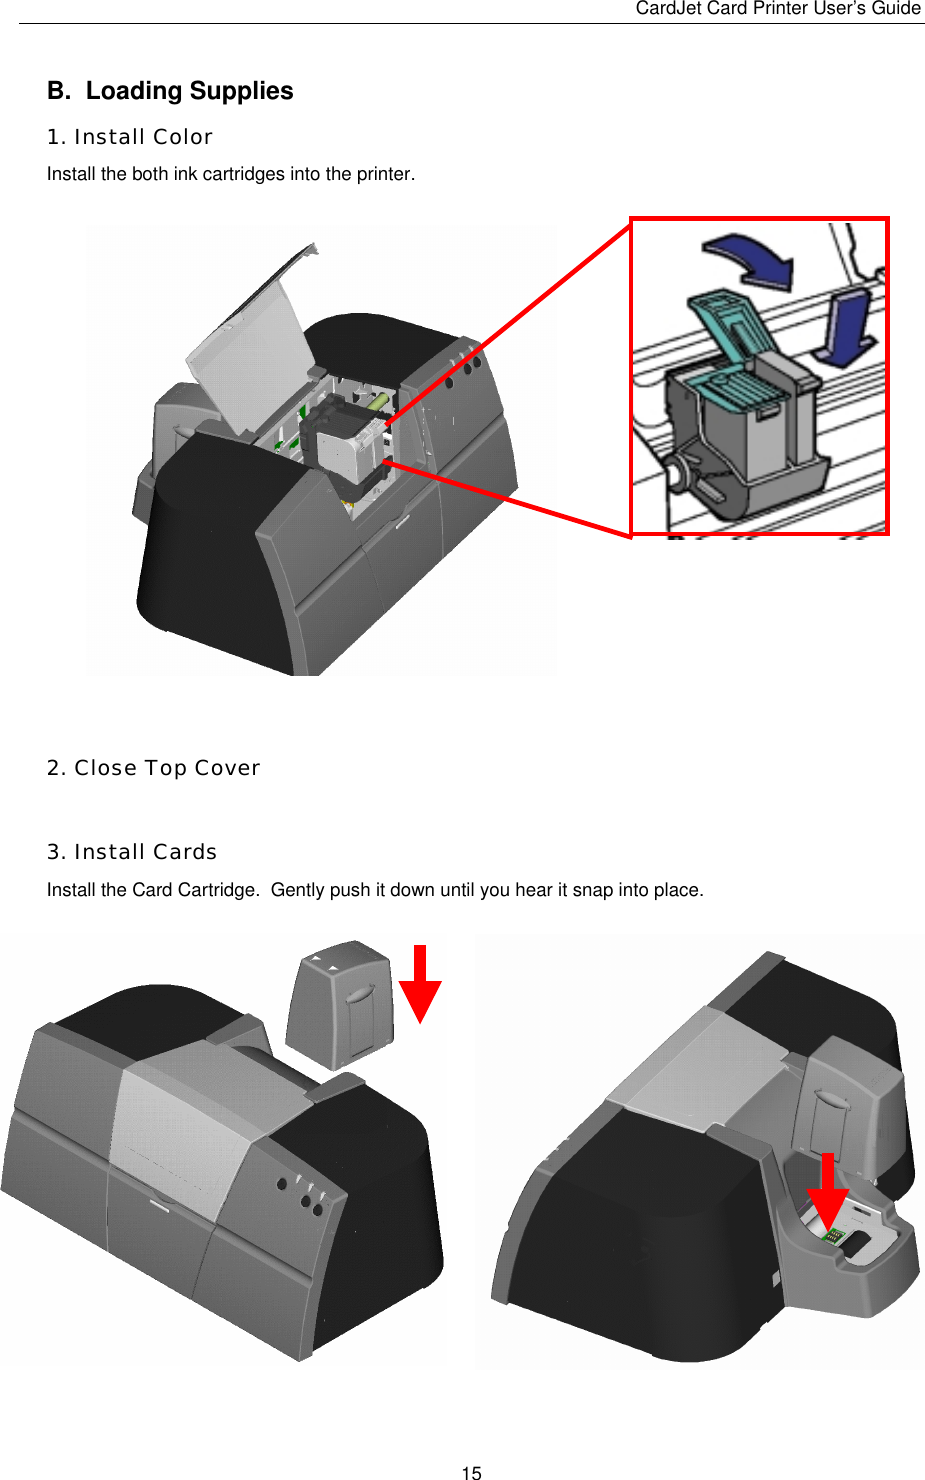 CardJet Card Printer User’s Guide  15 B.  Loading Supplies 1. Install Color Install the both ink cartridges into the printer.    2. Close Top Cover  3. Install Cards Install the Card Cartridge.  Gently push it down until you hear it snap into place. 